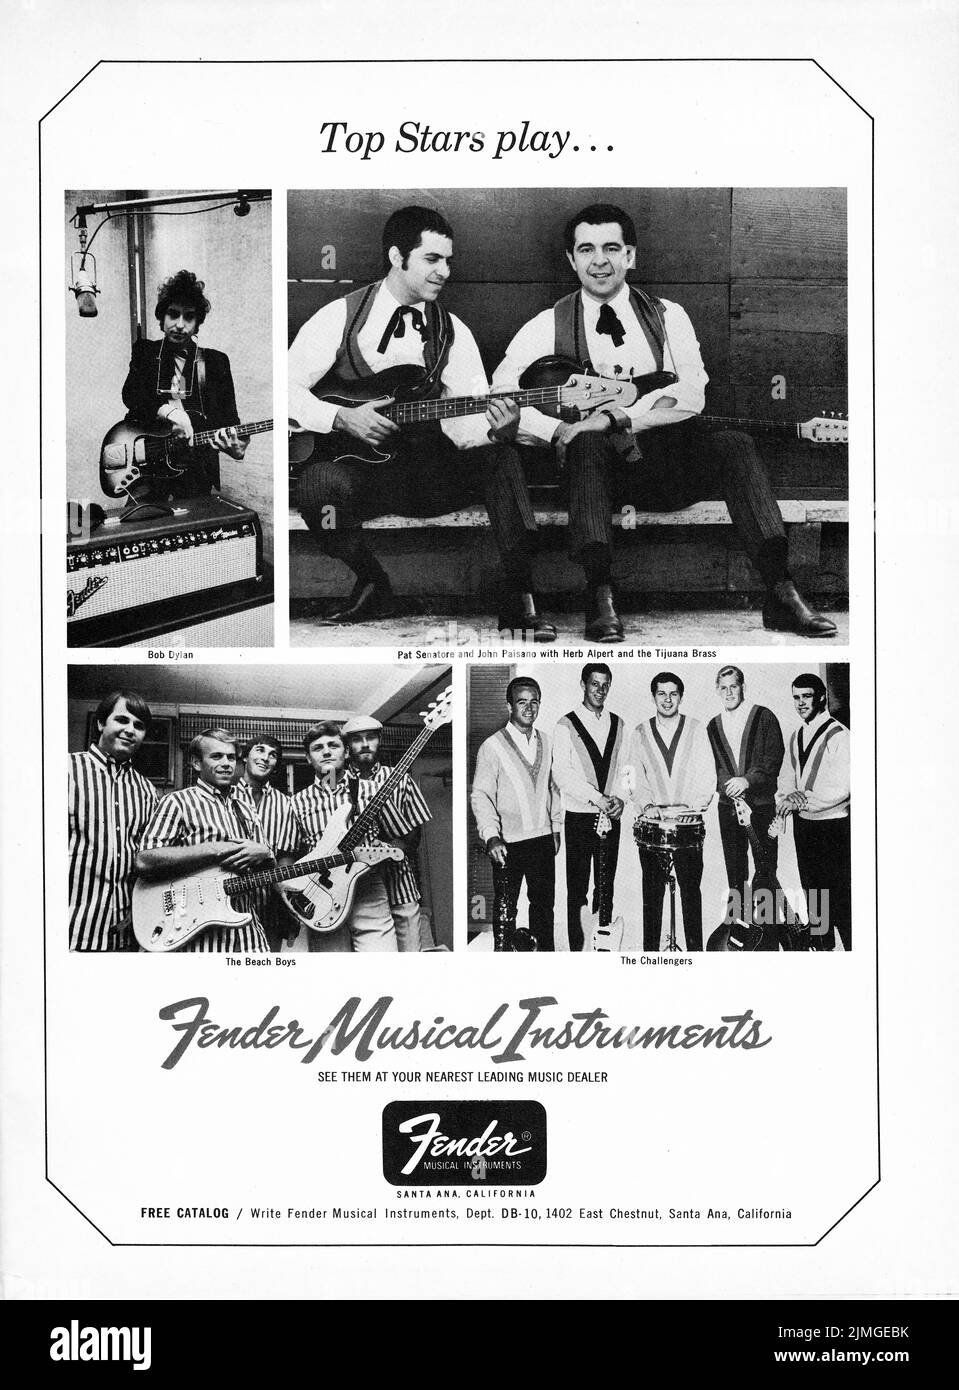 A Fender guitar ad from a 1962 music magazine showing that top stars play Fender instruments. The ad features Bob Dylan, the Beach Boys, members of Herb Alpert's band & the Challengers. Stock Photo